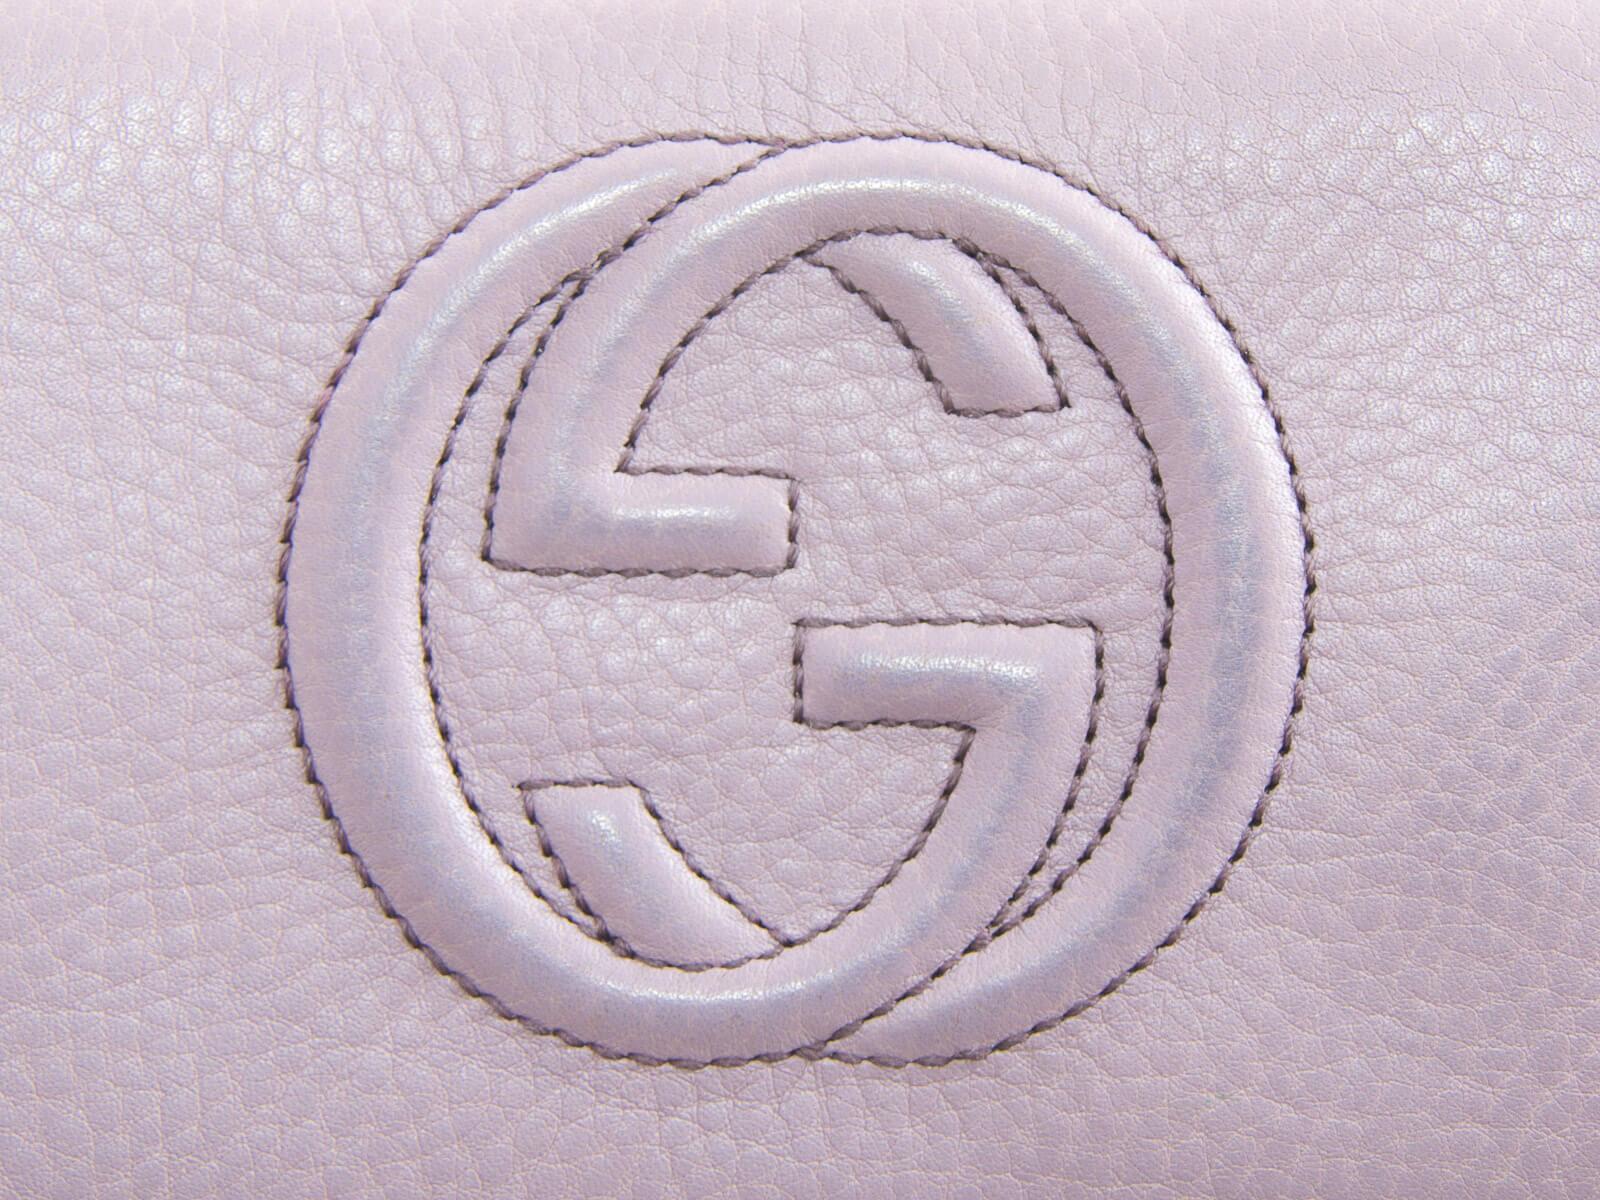 Authentic Gucci Logo - Authentic Gucci GG logo Soho lavender leather zip around wallet ...